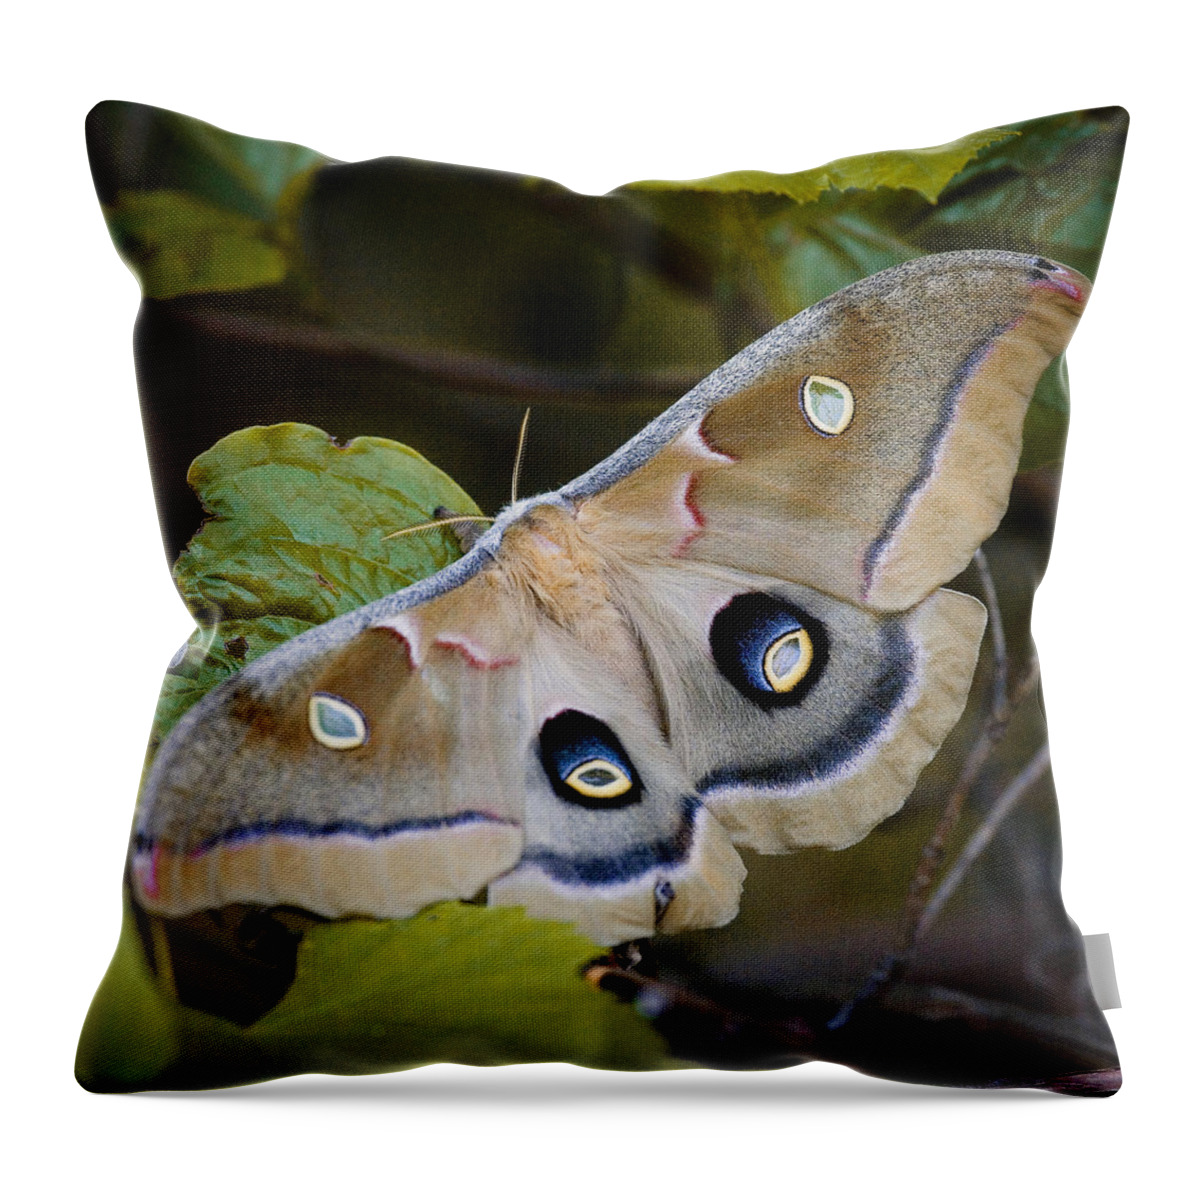 Moth Throw Pillow featuring the photograph Polyphemous Moth on Branch by Michael Dougherty